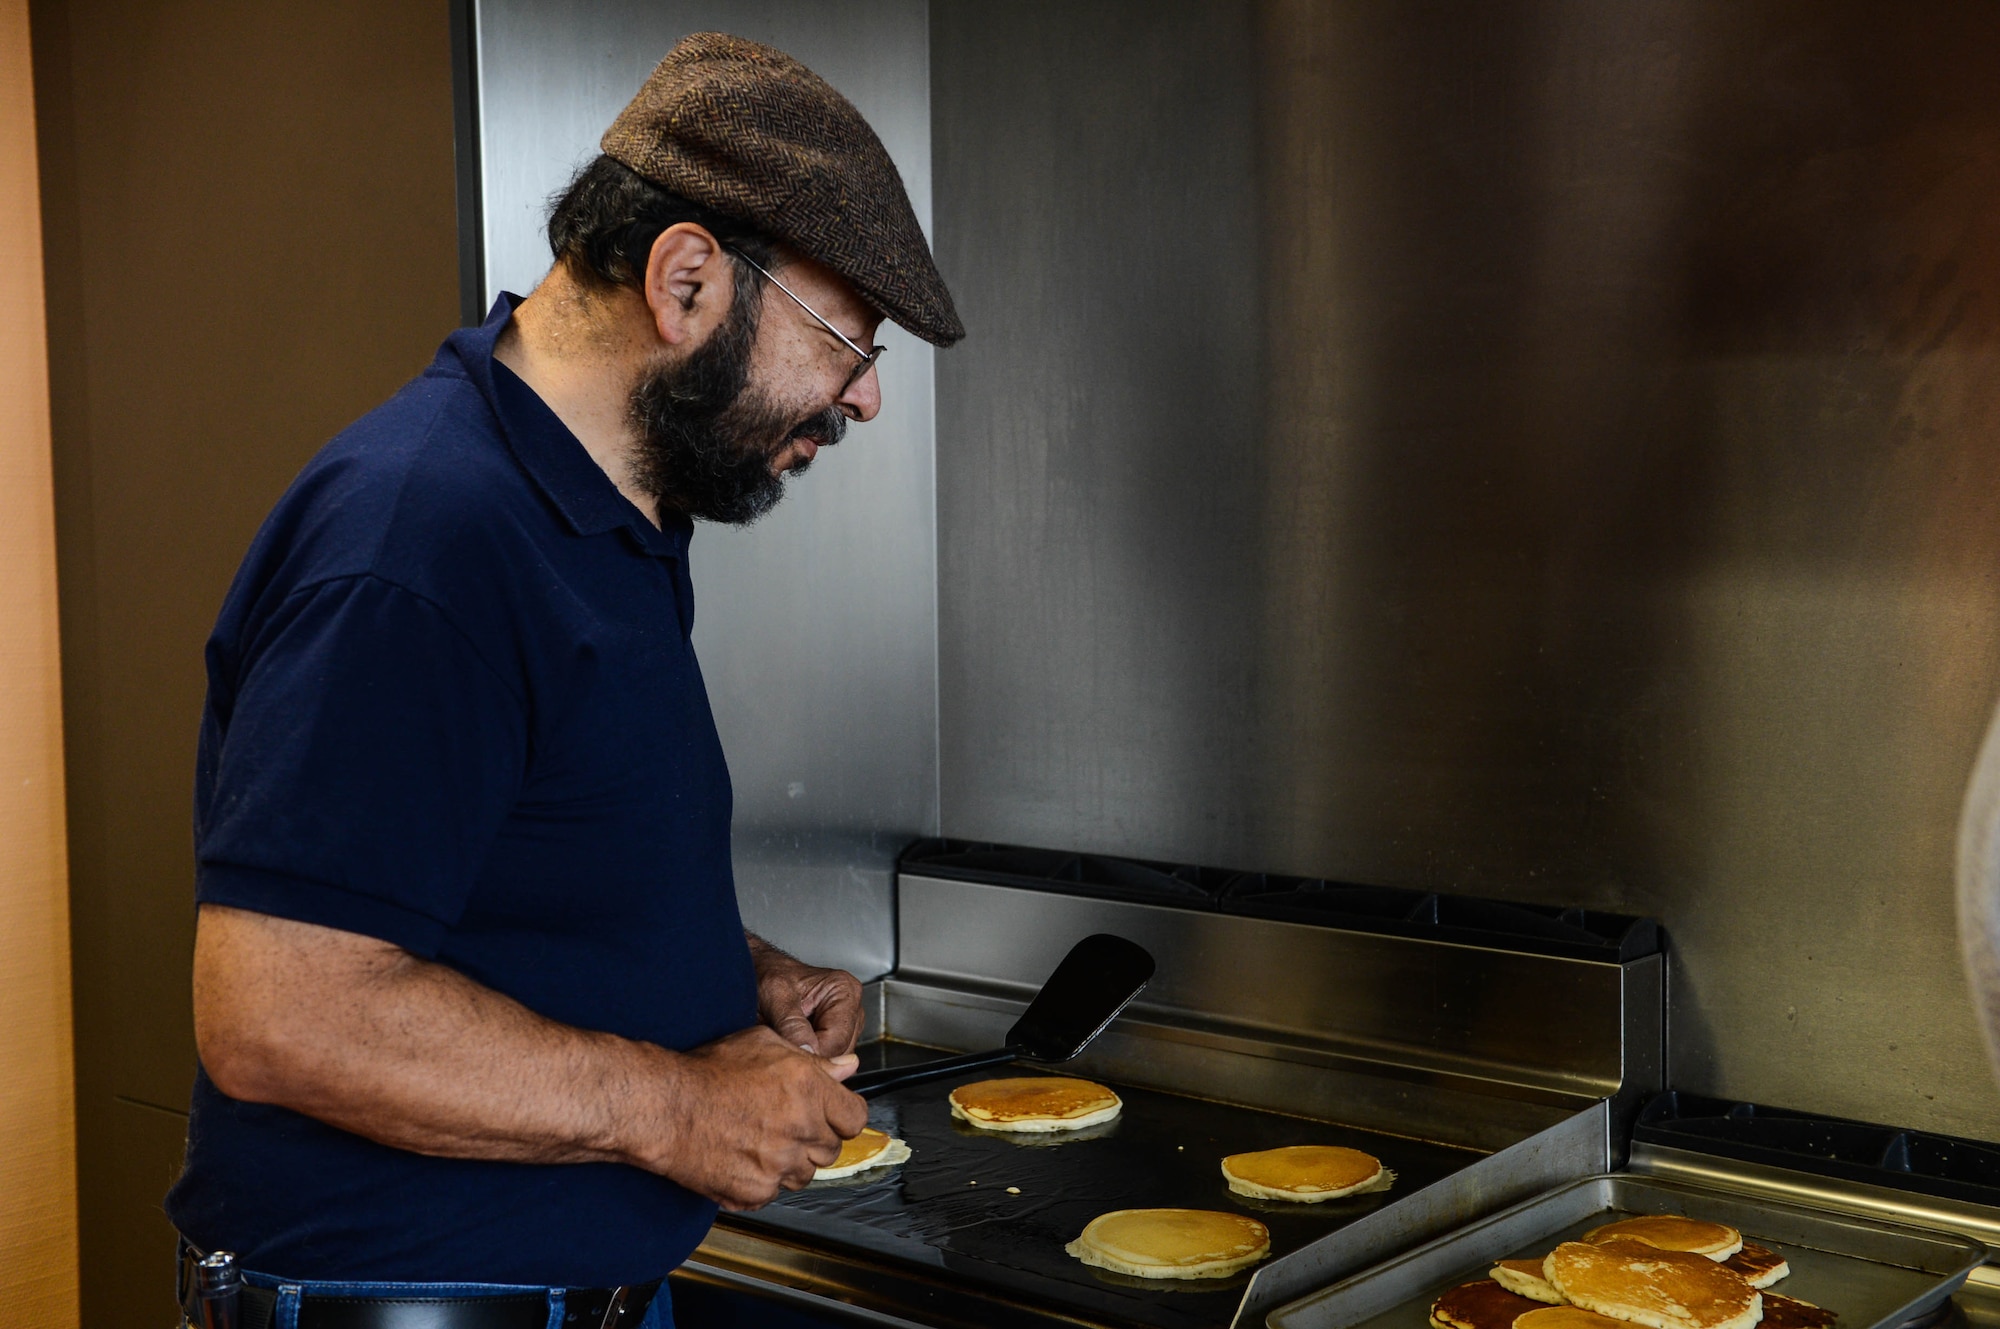 David Castillo, a chapel volunteer from Fresno, Calif., cooks for a pancake breakfast in the chapel at Spangdahlem Air Base, Germany, Aug. 17, 2014. The Spangdahlem Catholic community hosted a breakfast for families after the religious service. The complimentary meal fed more than 80 people. The chapel provides services for a variety of religious backgrounds. (U.S. Air Force photo by Airman 1st Class Kyle Gese/Released)